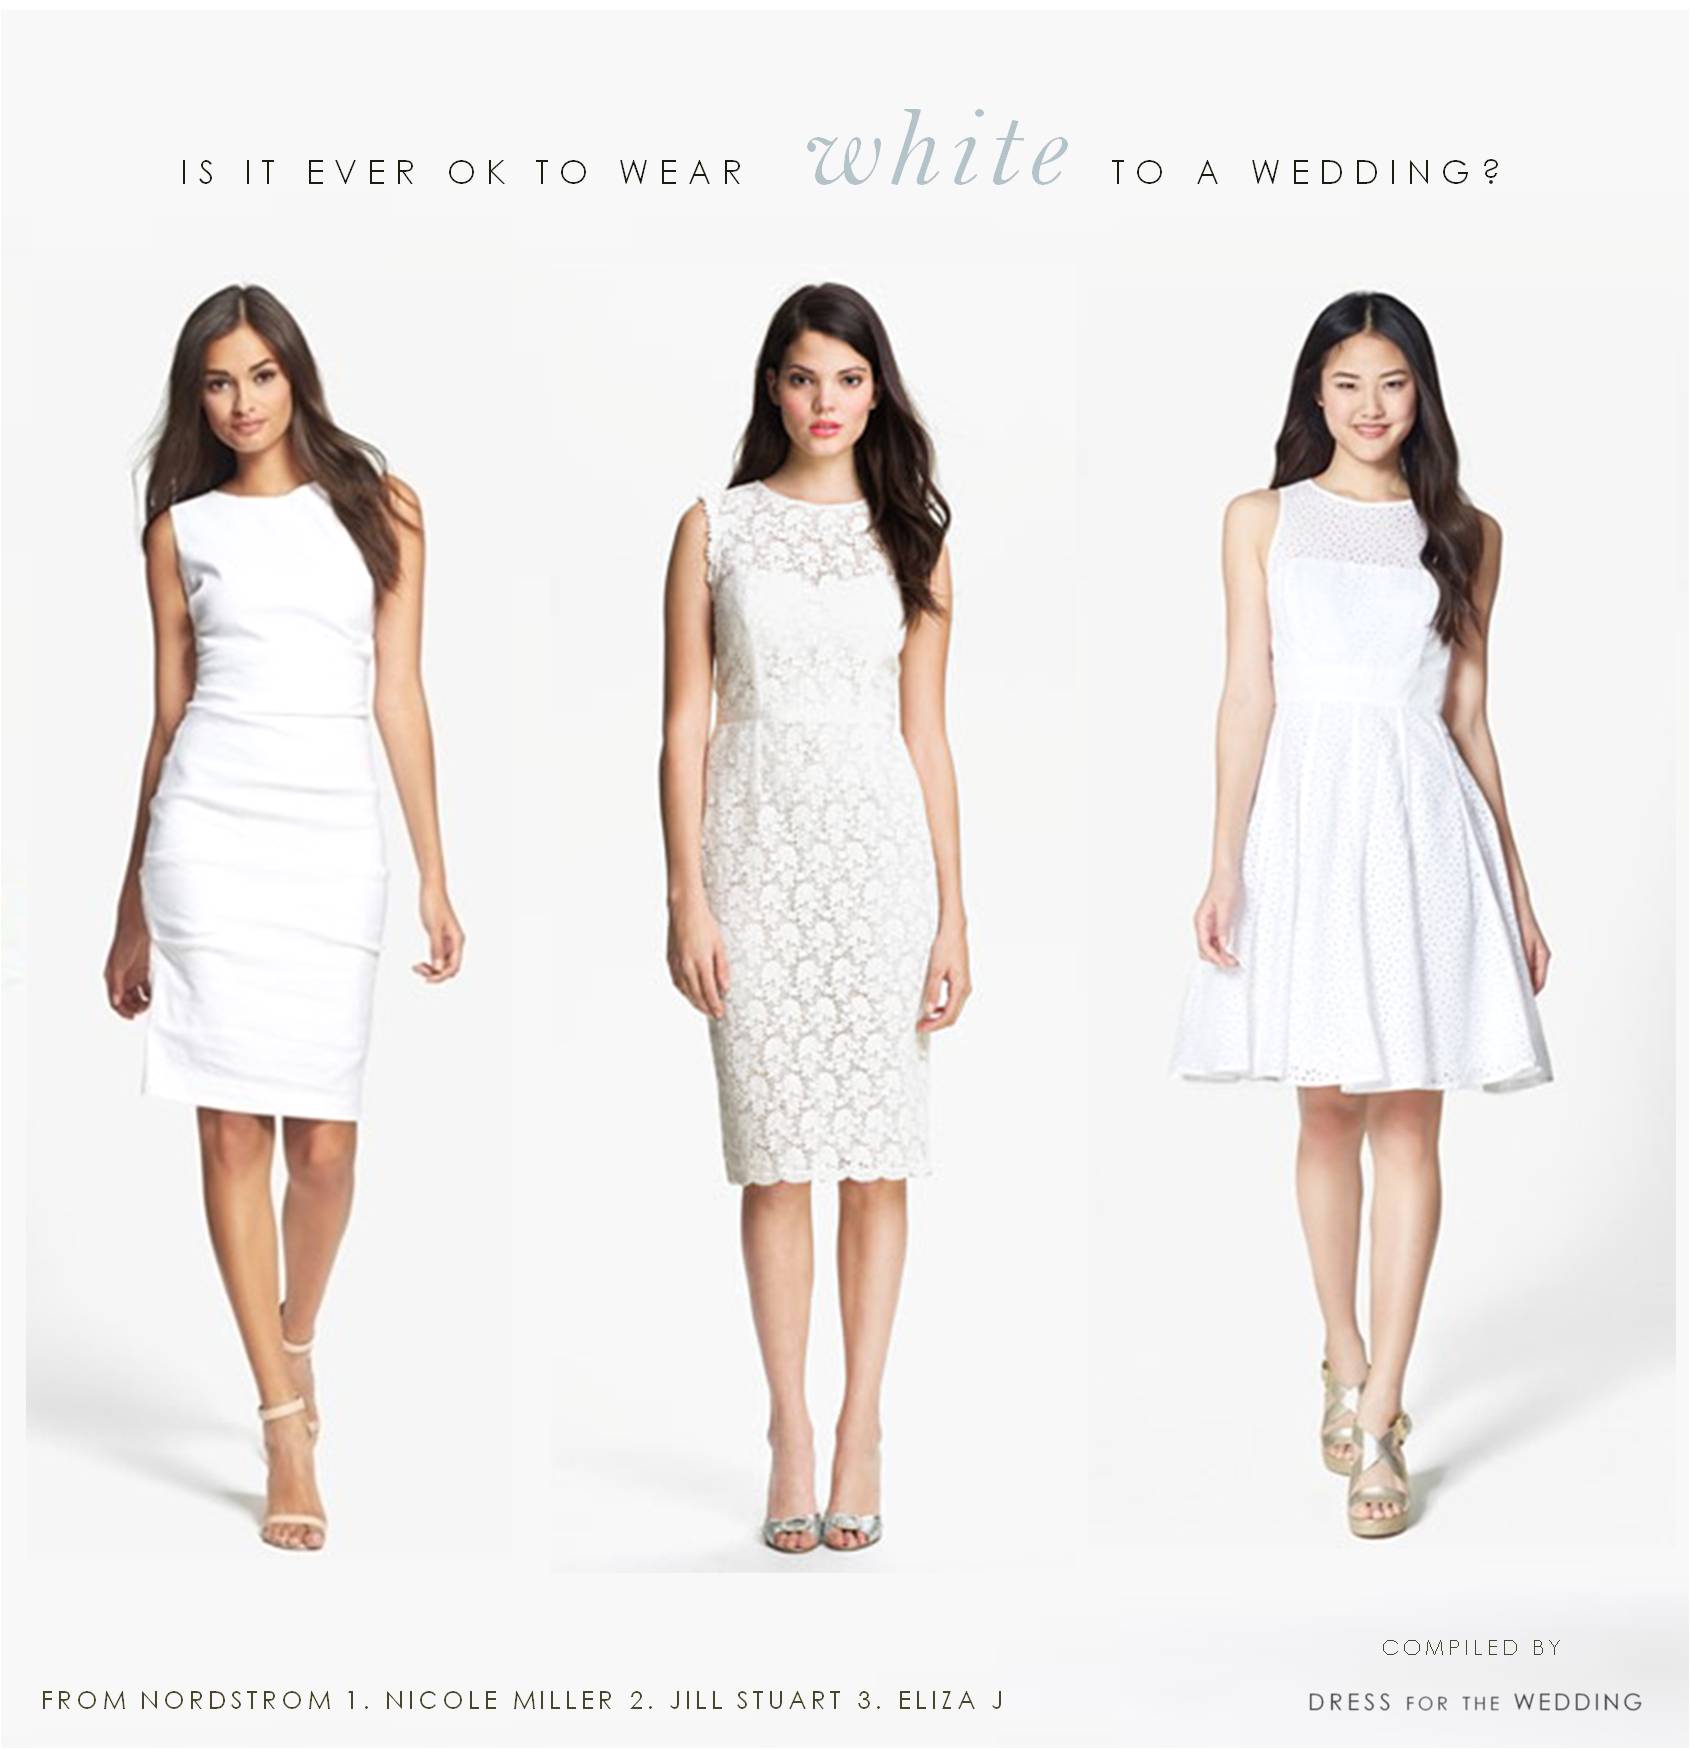 white dresses for wedding guests